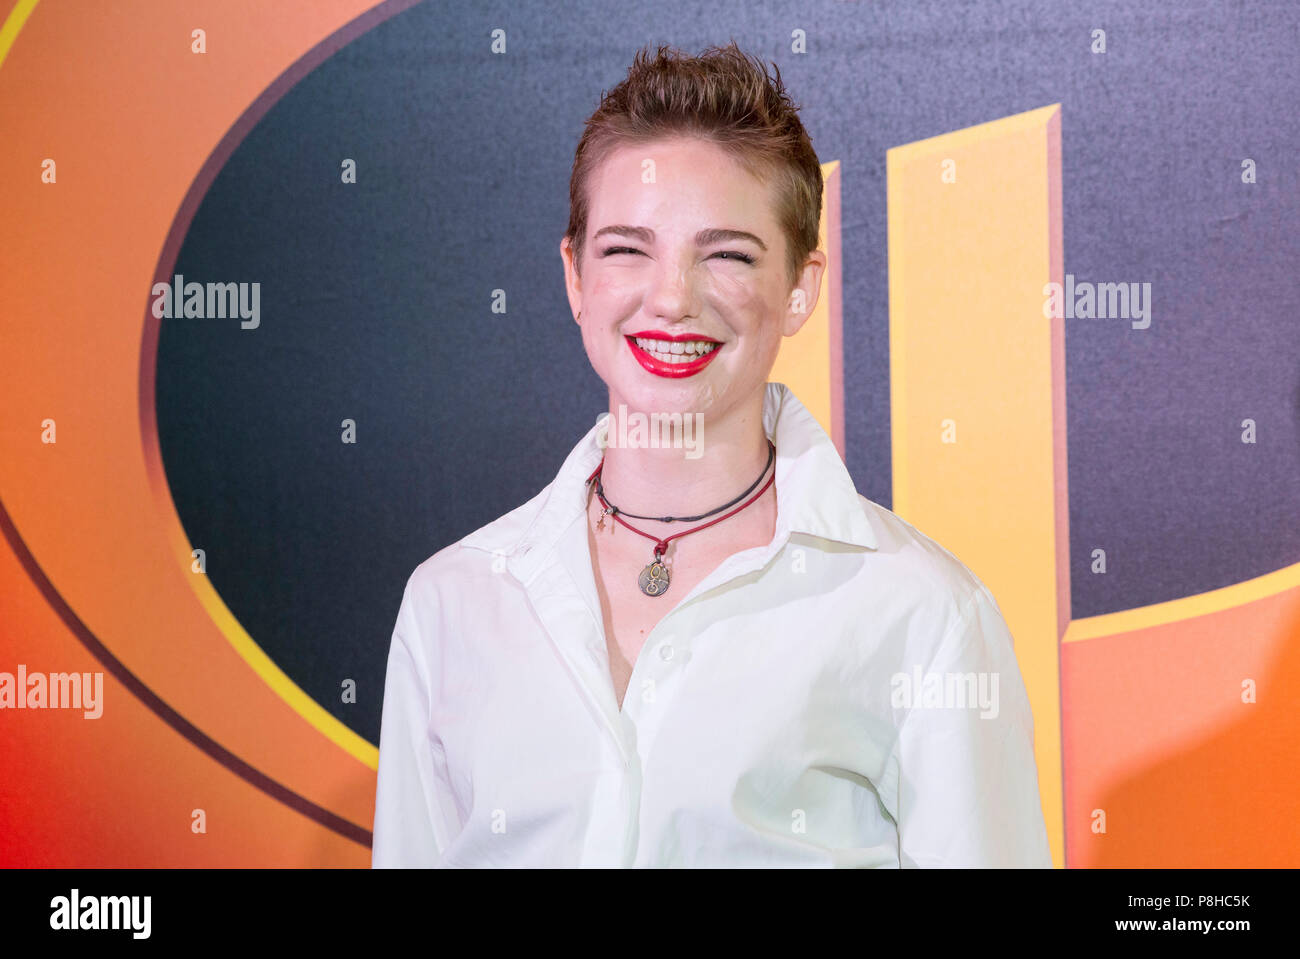 Rome, Italy. 12th July, 2018. Full cast The Incredibles 2 attending the photocall at Hotel De Russie in Rome Credit: Silvia Gerbino/Alamy Live News Stock Photo